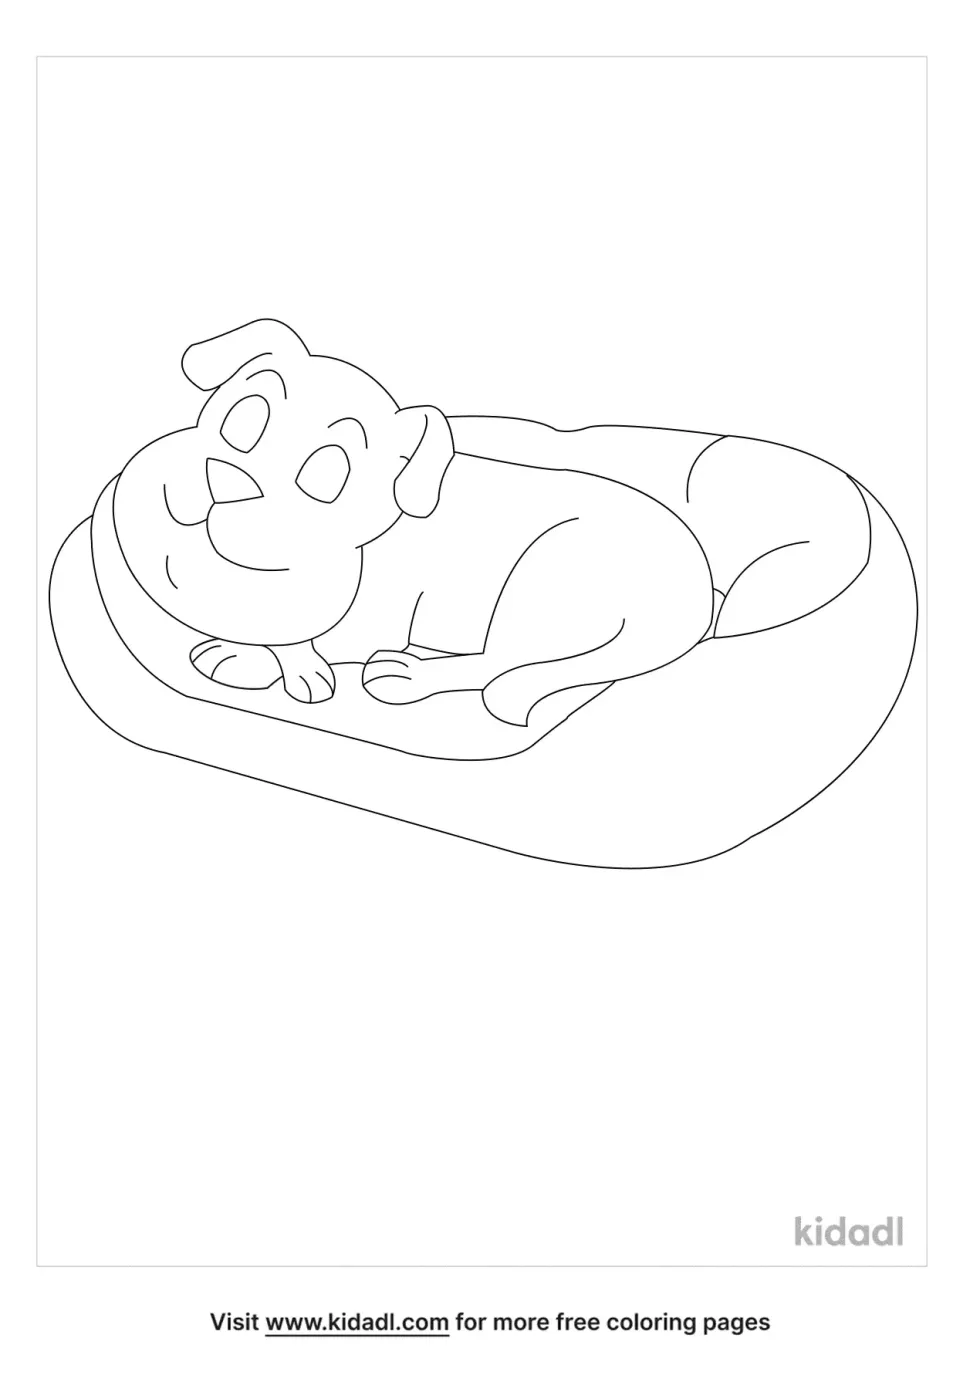 Dog On Bed Coloring Page